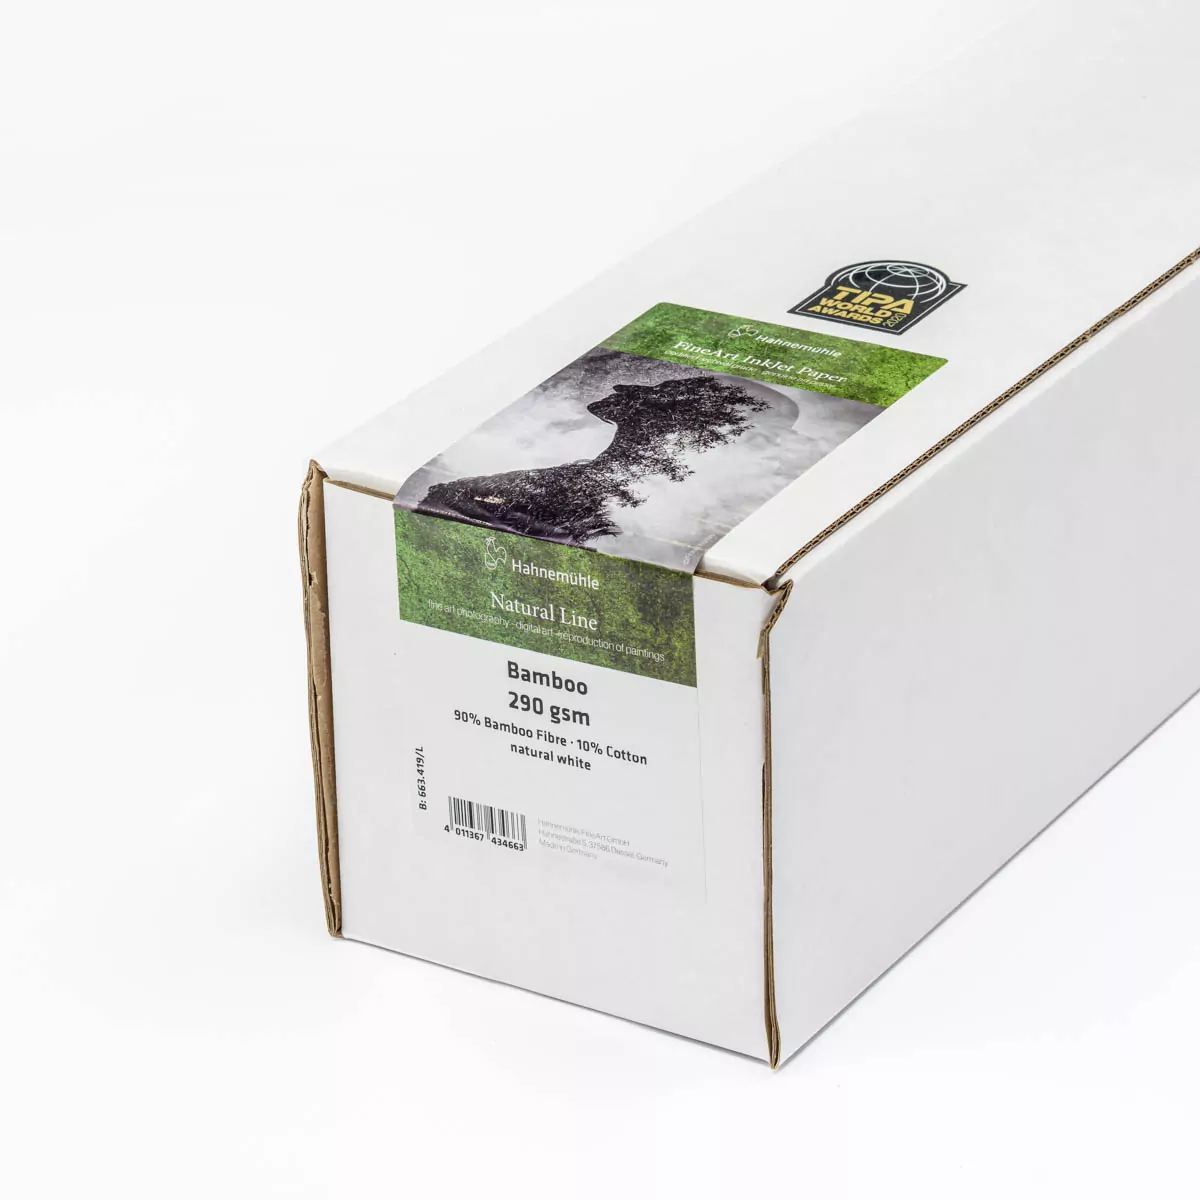 Hahnemuhle Bamboo 290gsm 36”(91cm)x12m roll